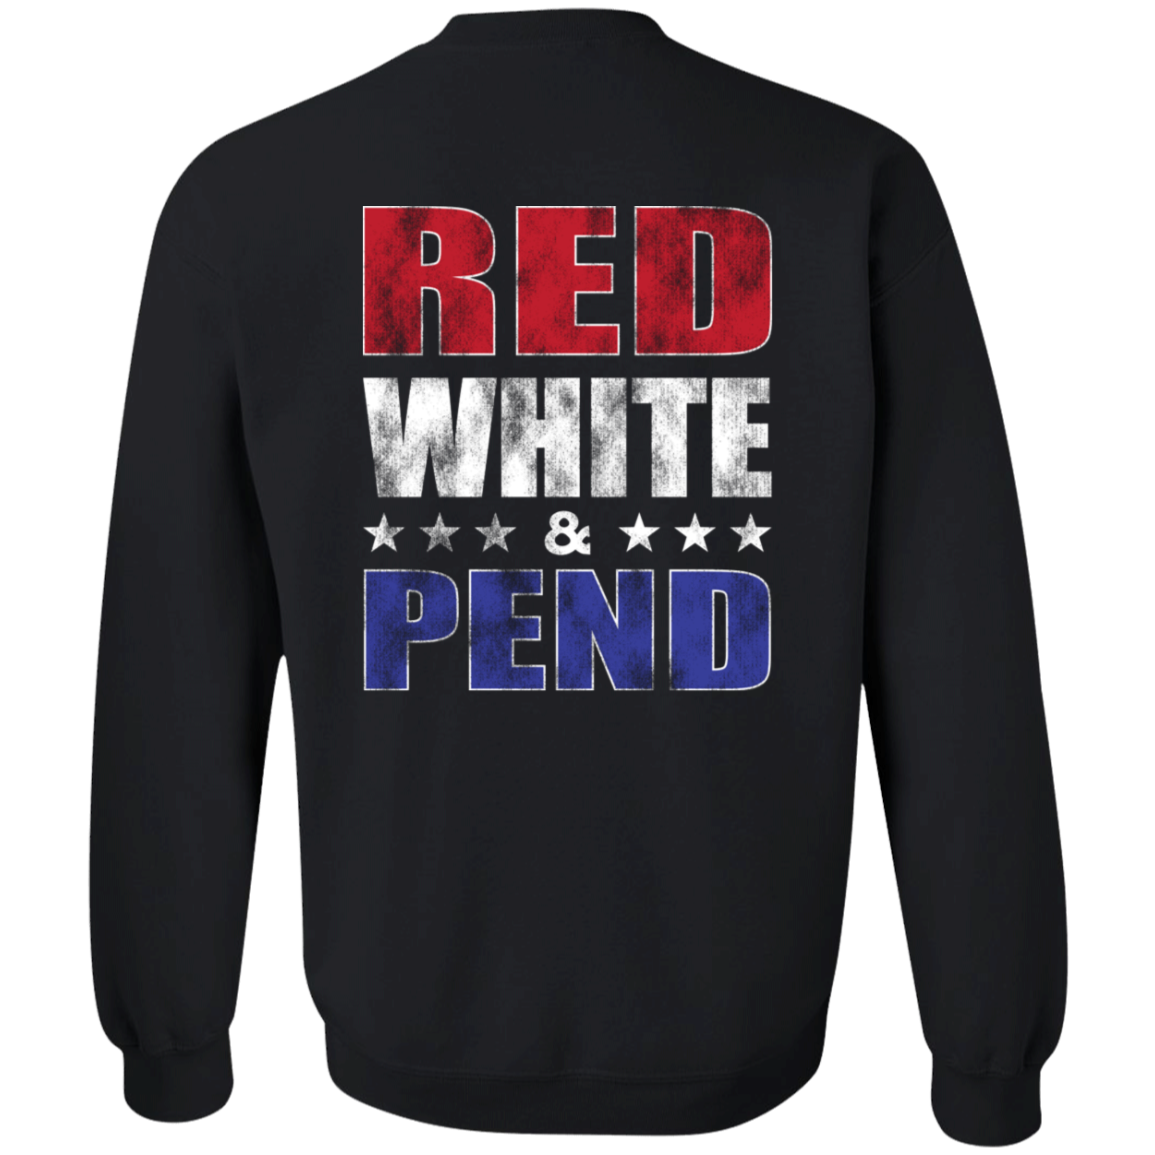 Red White & Pend (on Back) Youth Sweatshirt